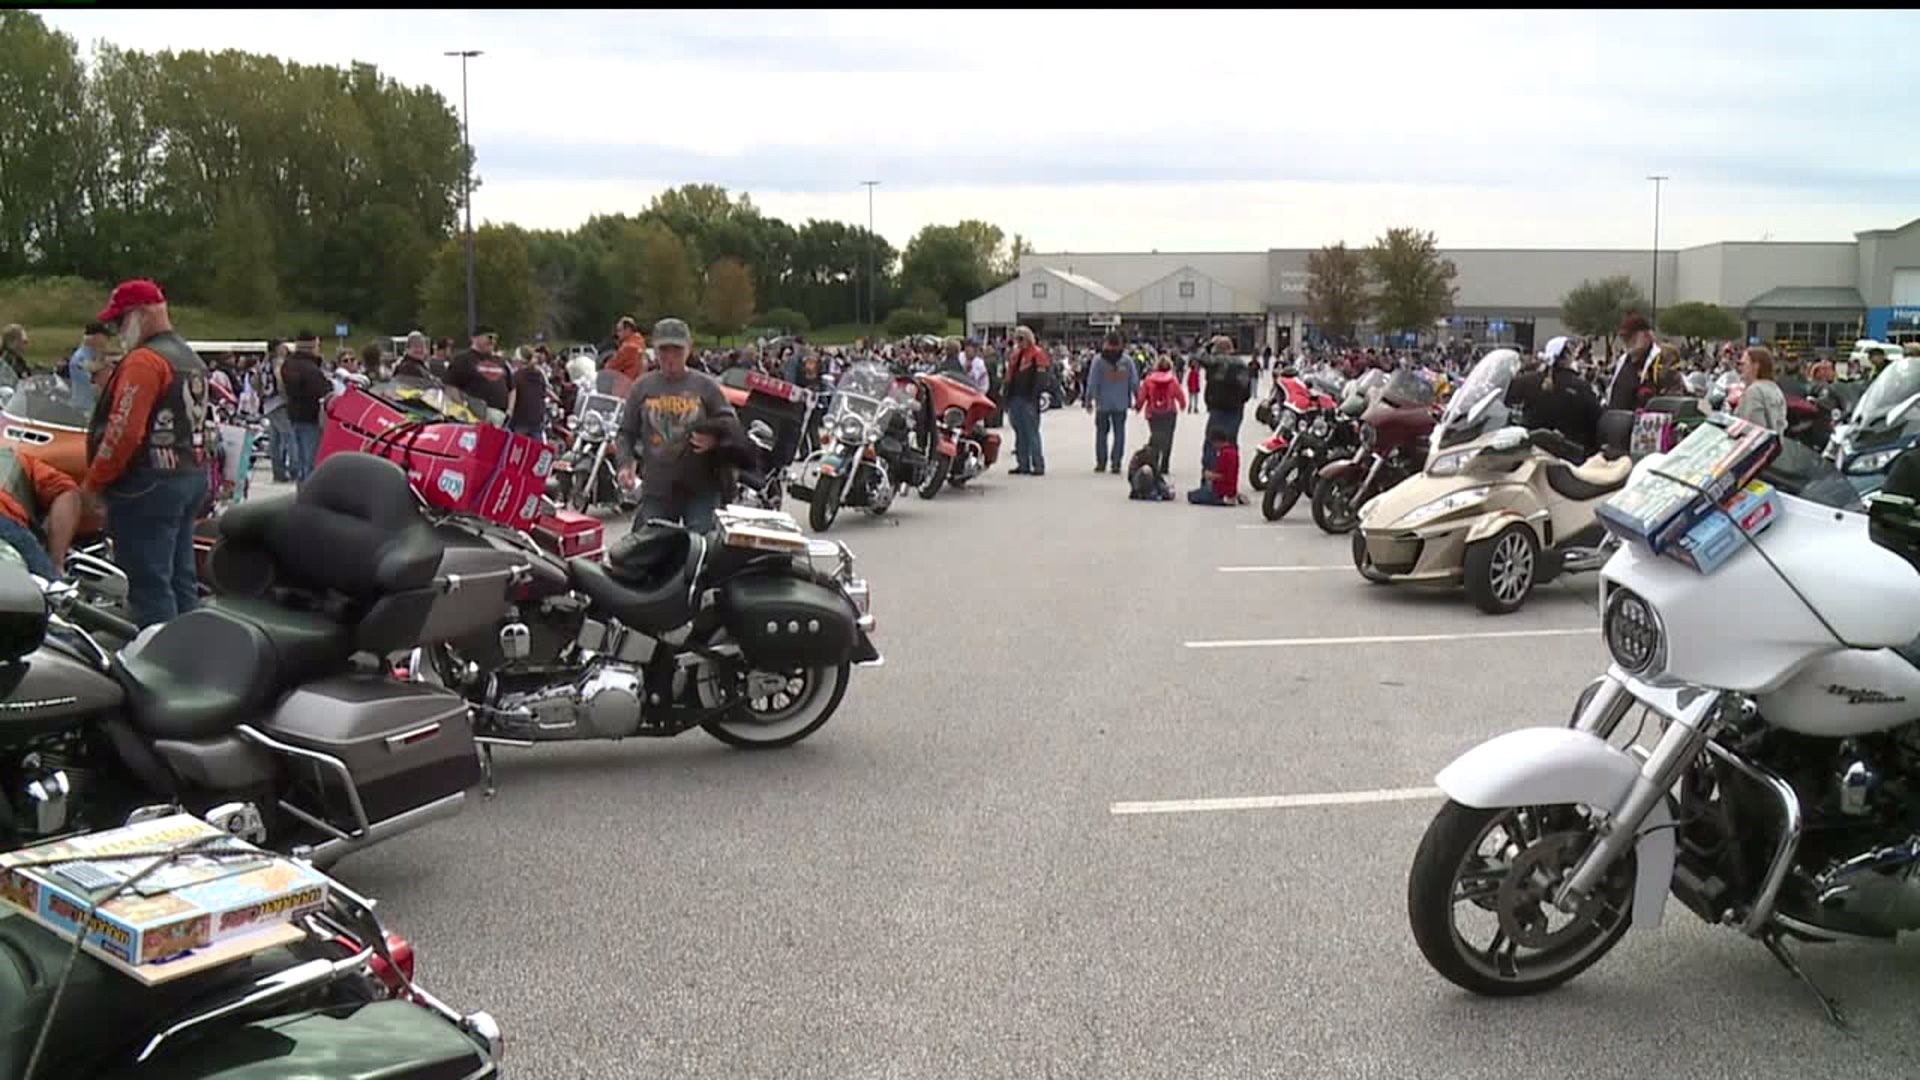 ABATE bikers ride off in Toys for Tots 35th annual Toy Run